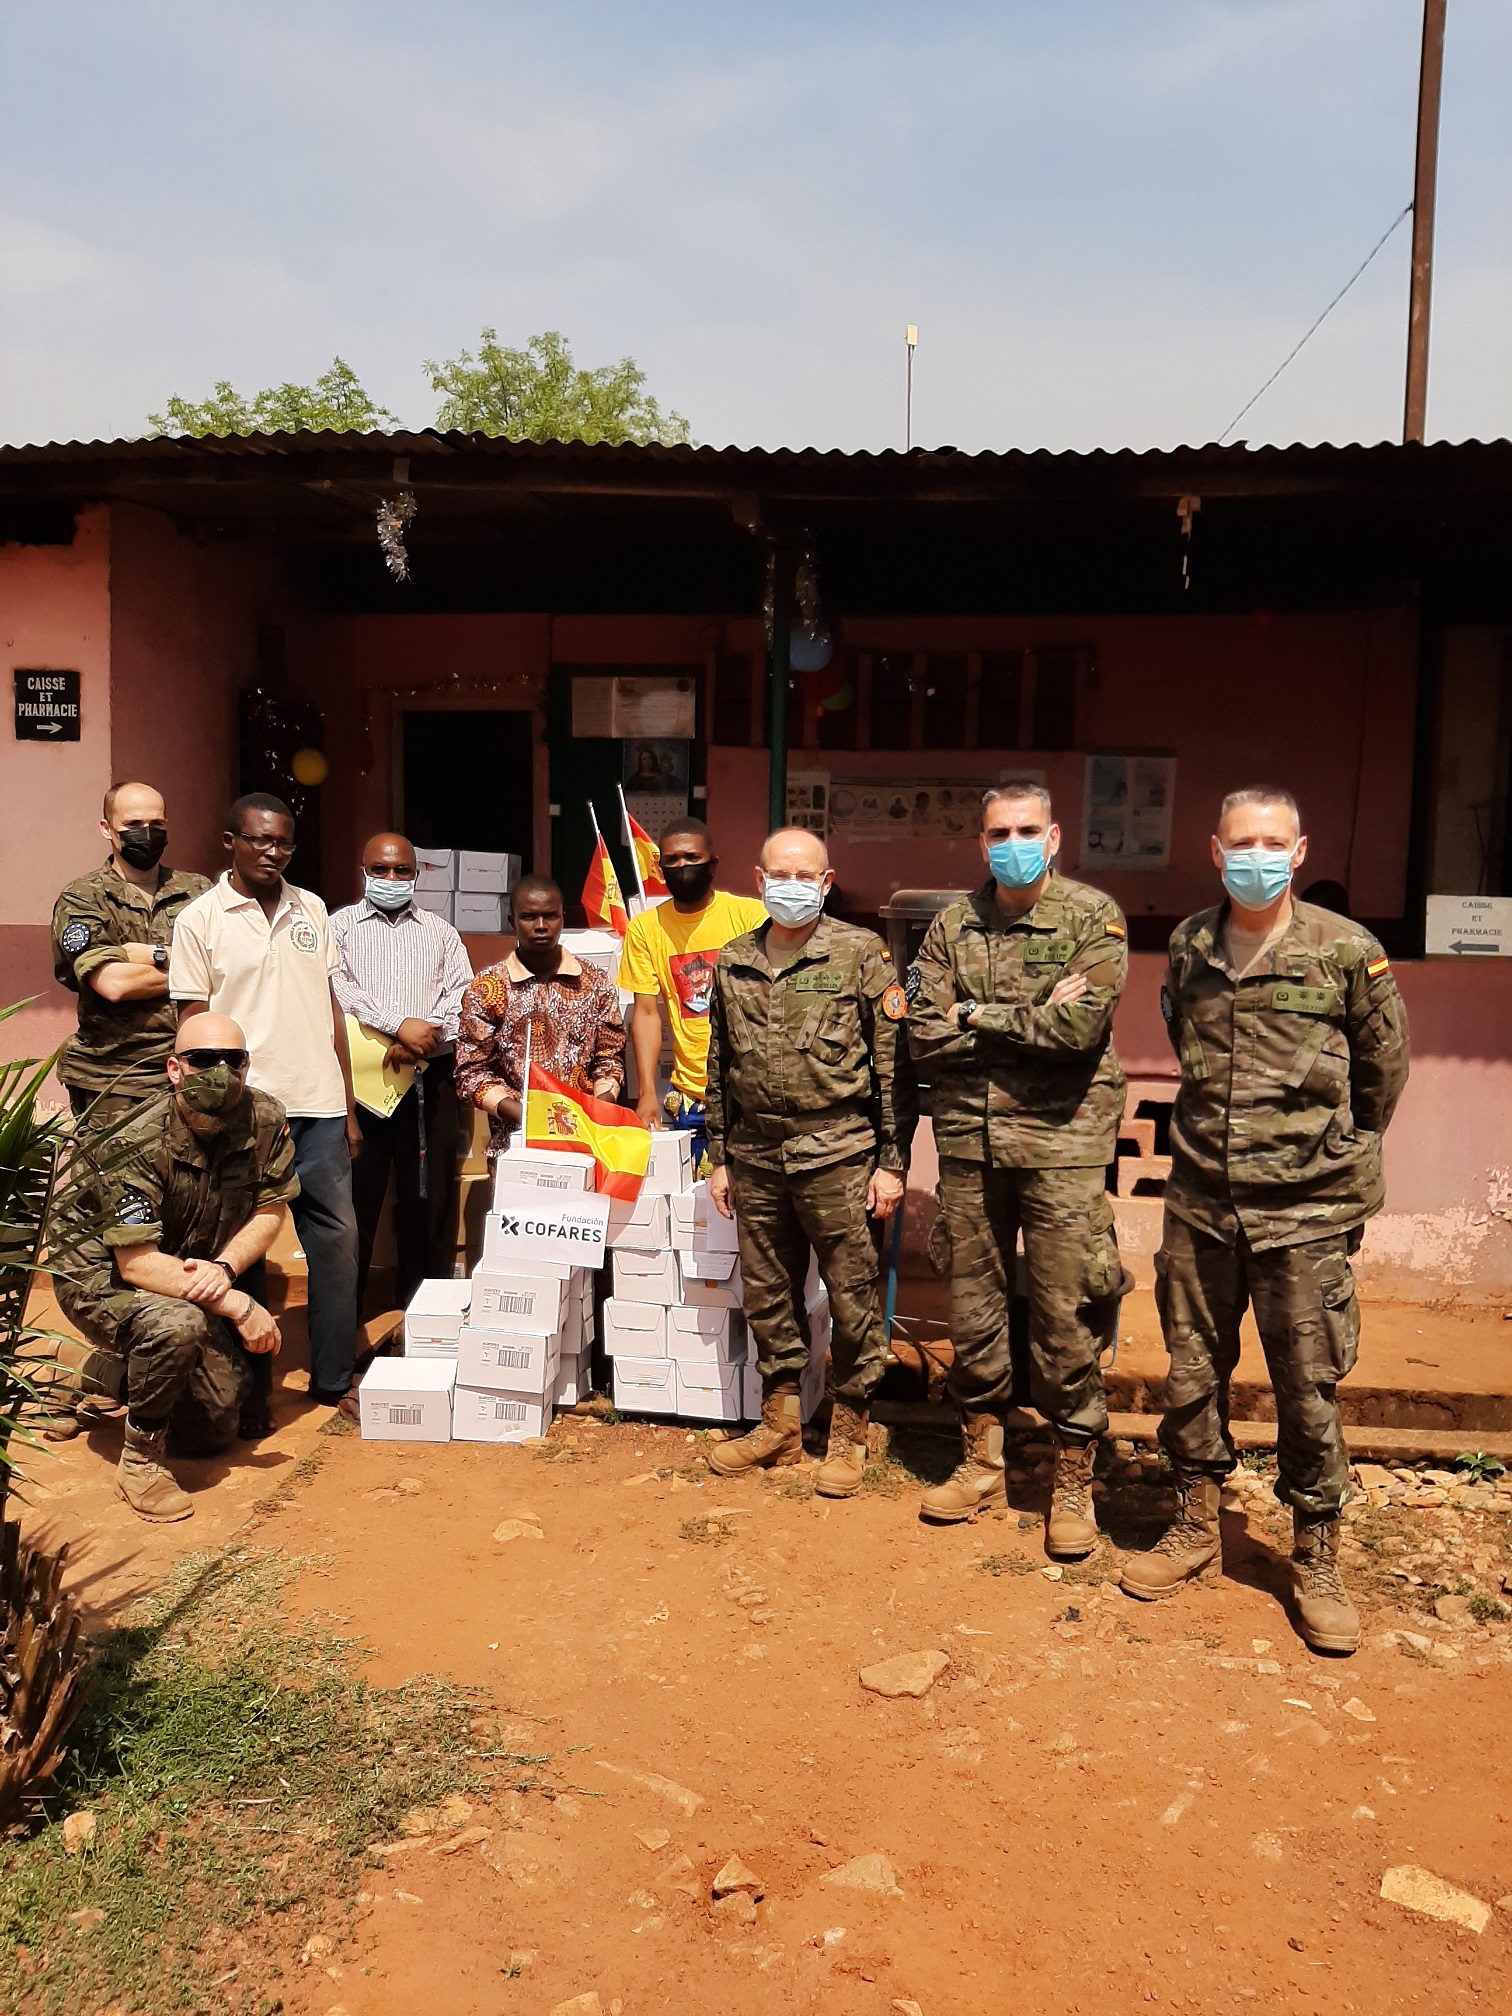 Spanish troops distribute medicines donated by 'COFARES foundation'